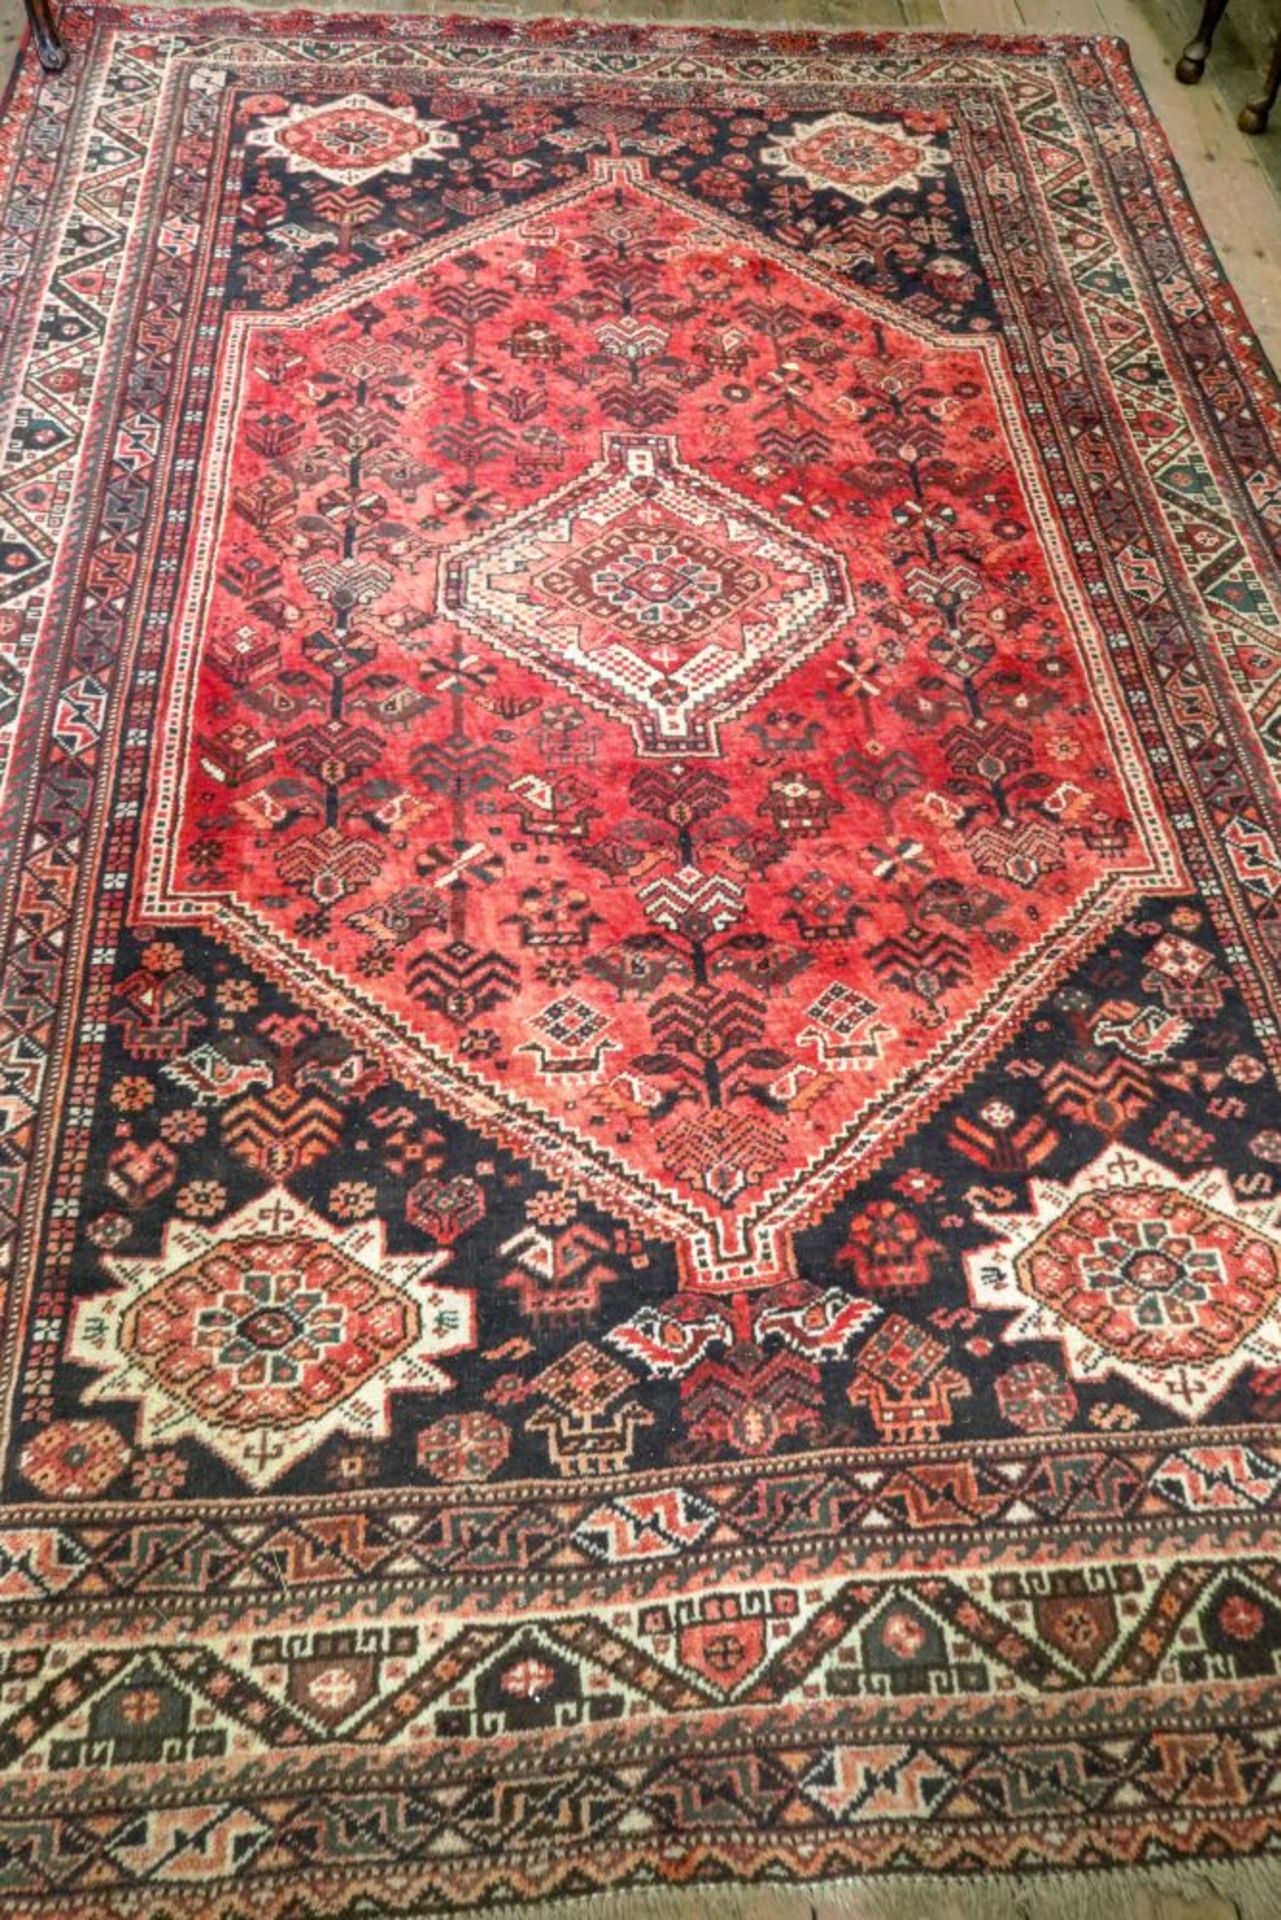 A South Persian rug, with a central lozenge surrounded by a repeated design on a red ground,